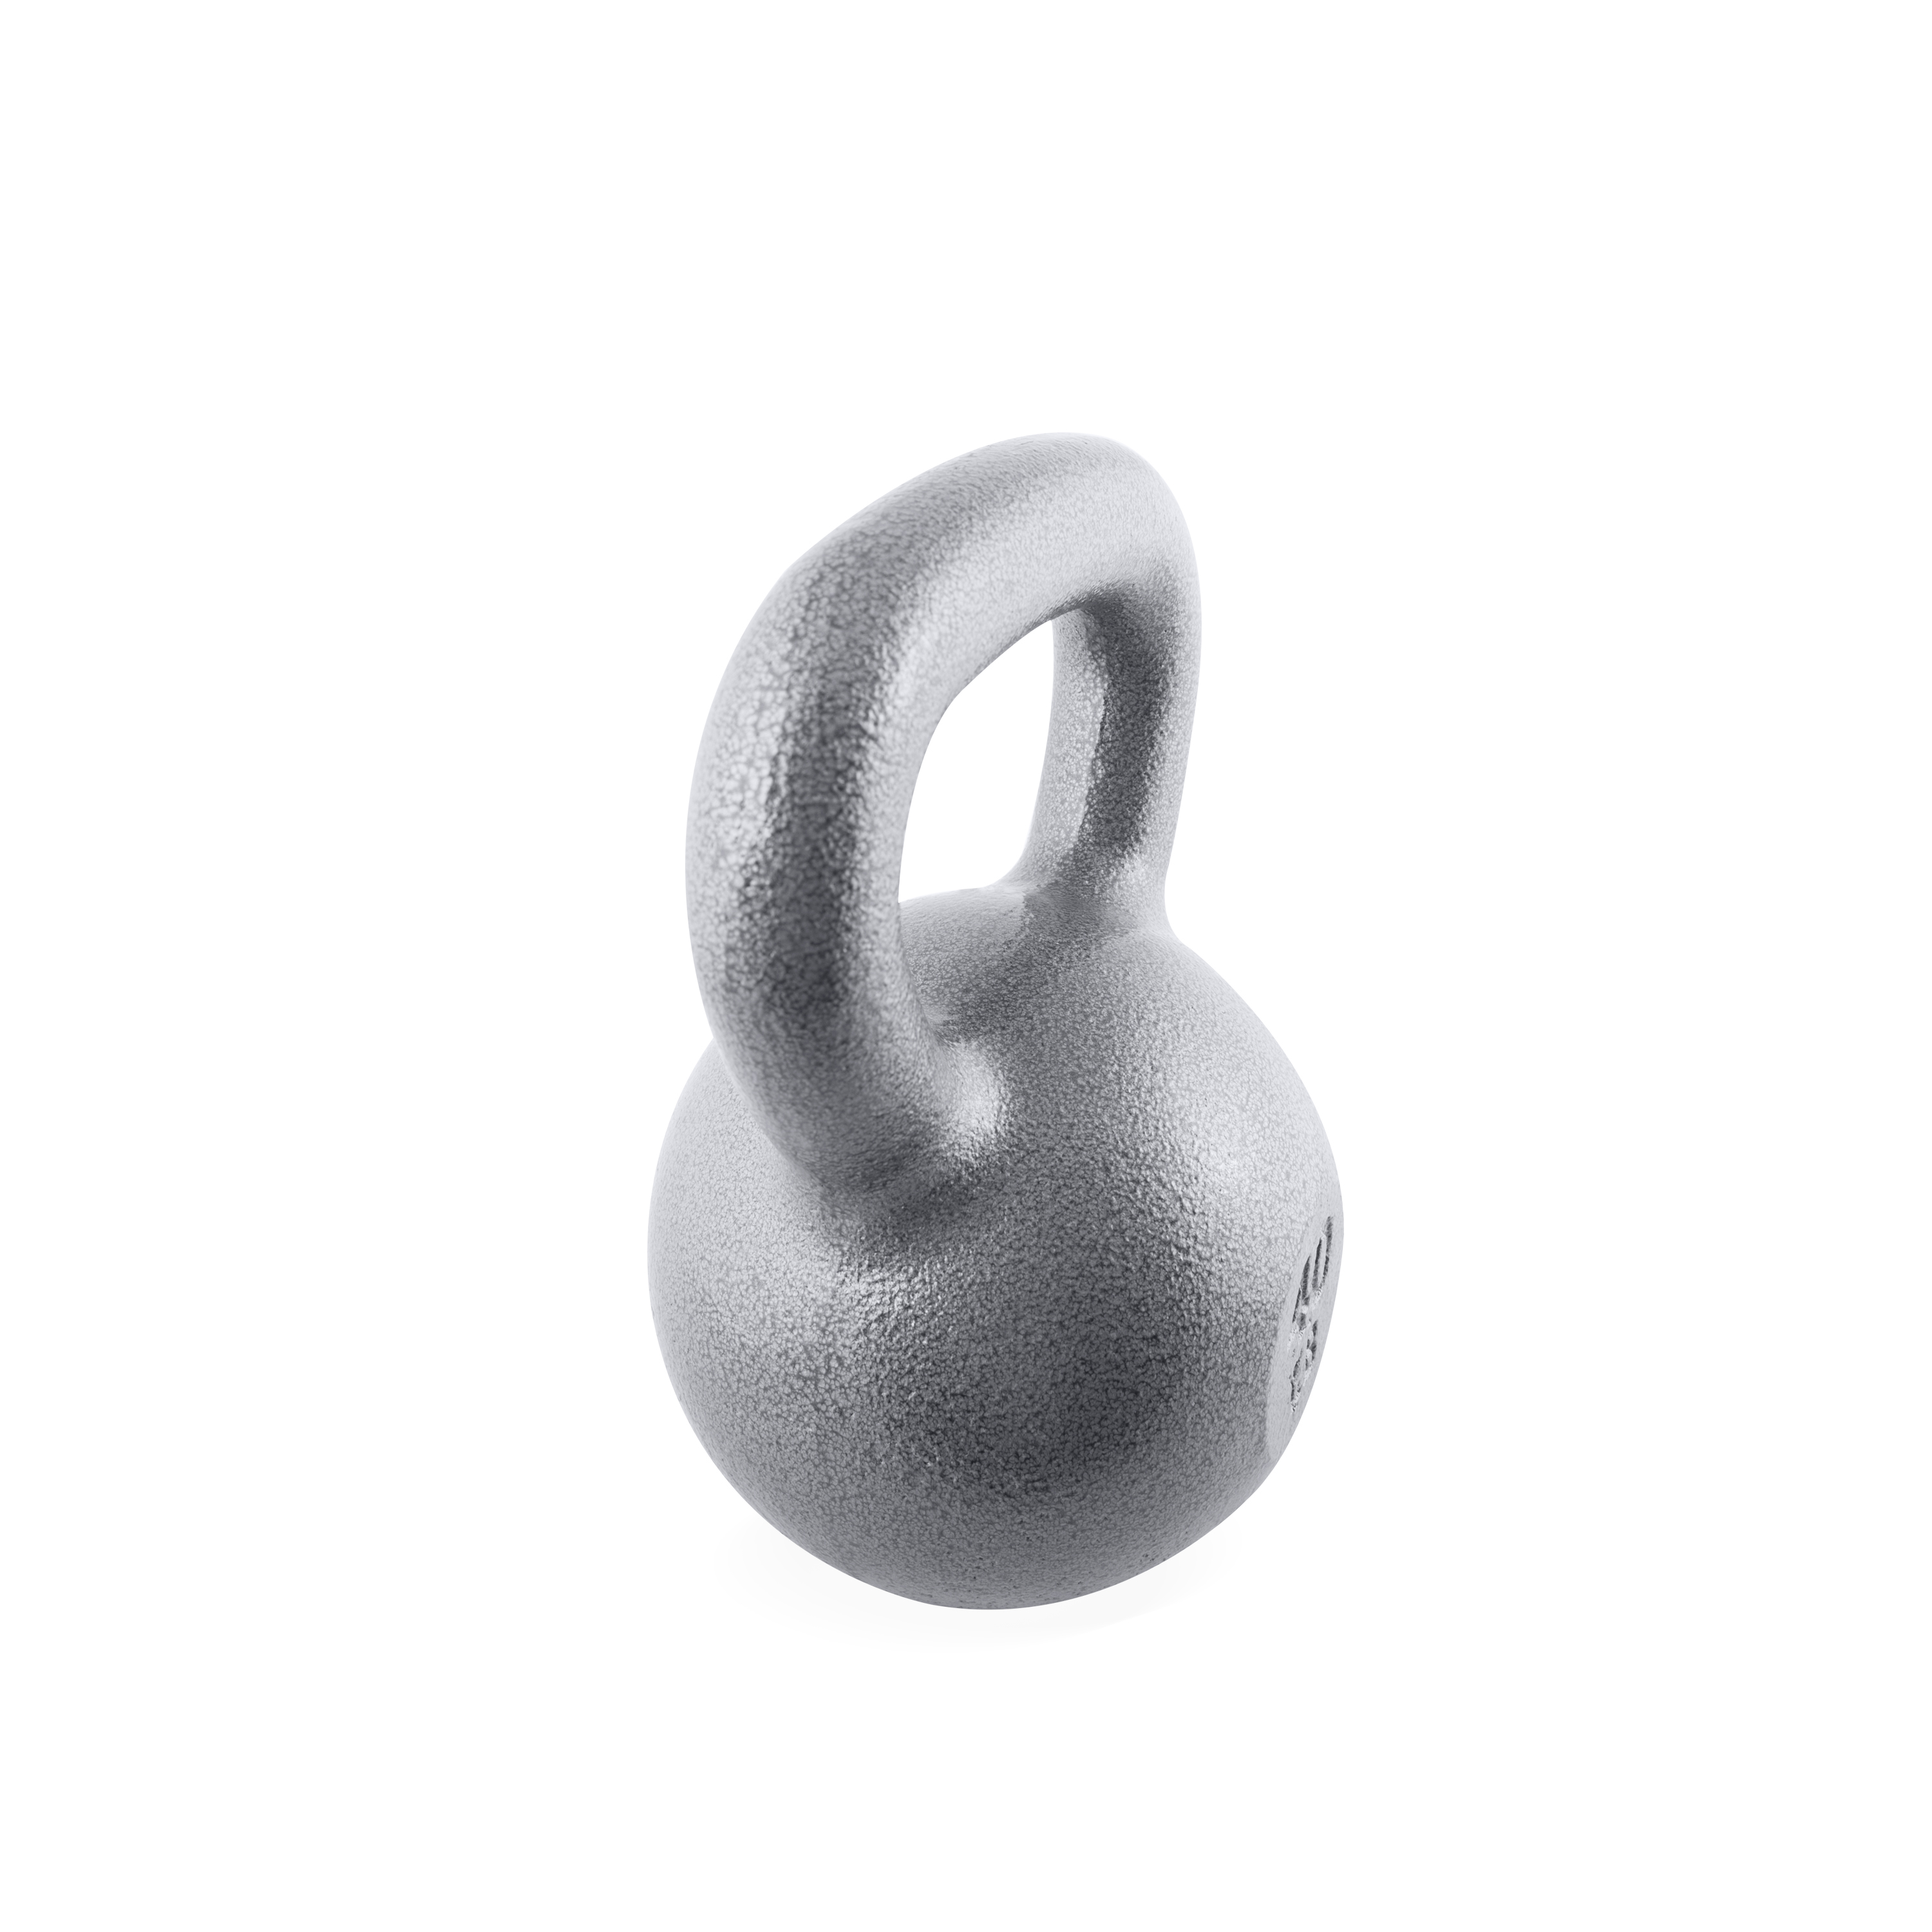 CAP Barbell Cast Iron Kettlebell, Single, 40-Pounds - image 3 of 8